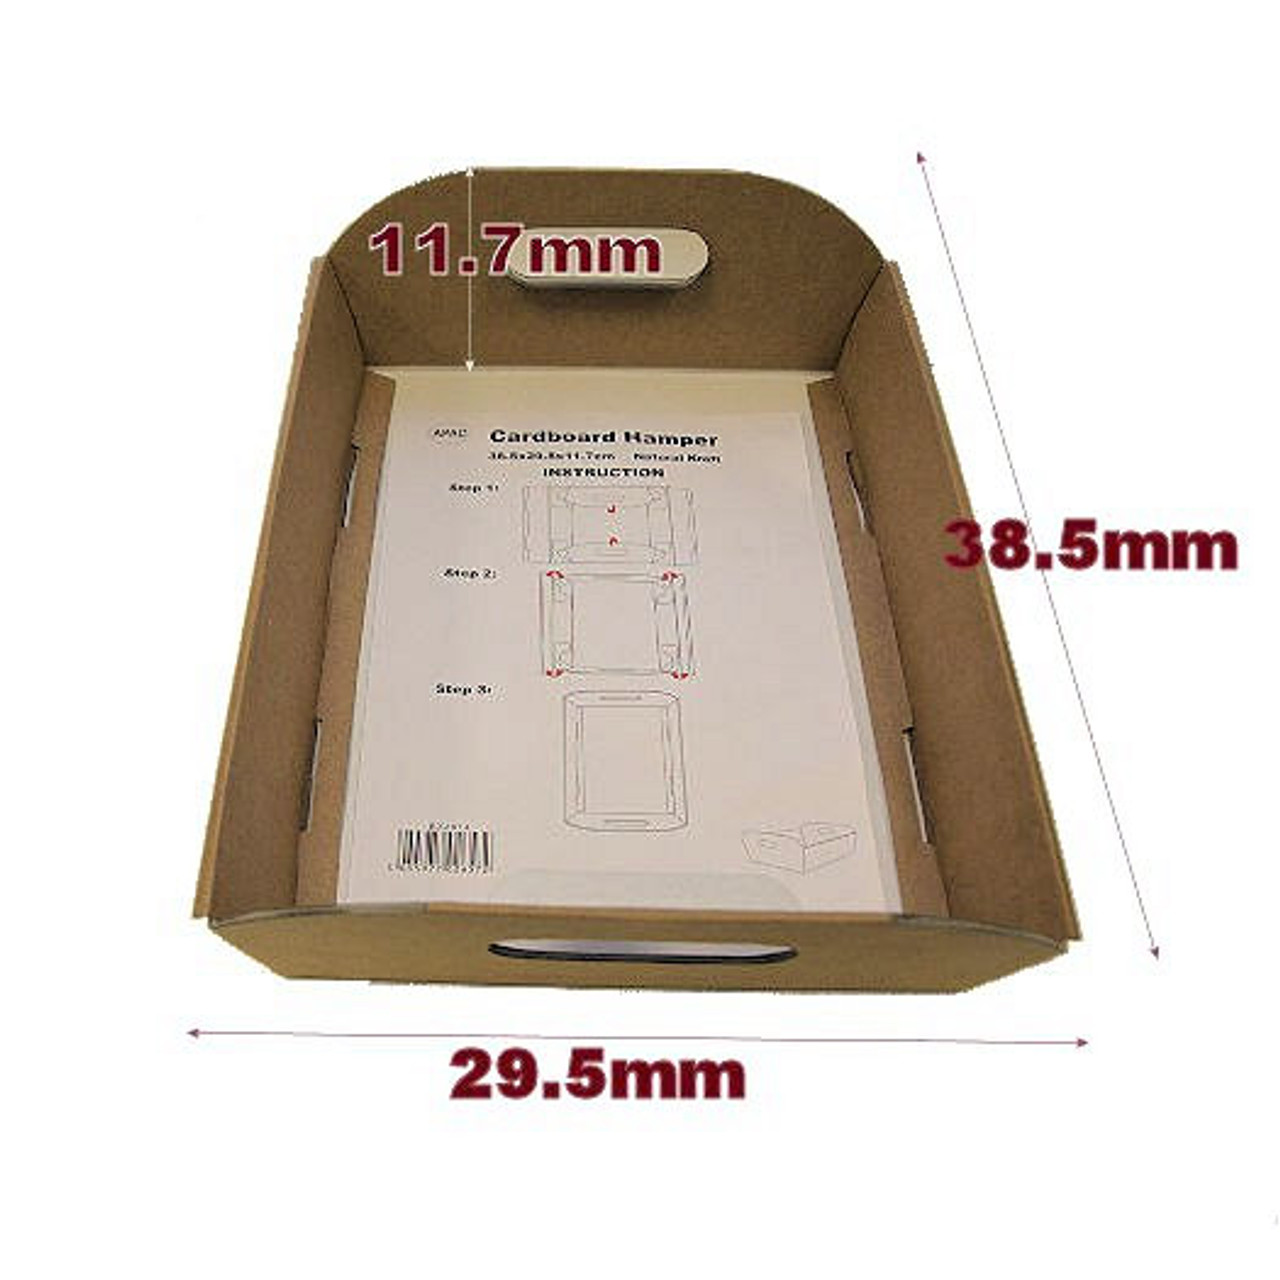 https://cdn11.bigcommerce.com/s-tjx0gy7pkp/images/stencil/1280x1280/products/15841/26001/Hamper_tray_cardboard_dimensions__20683.1620022877.jpg?c=2